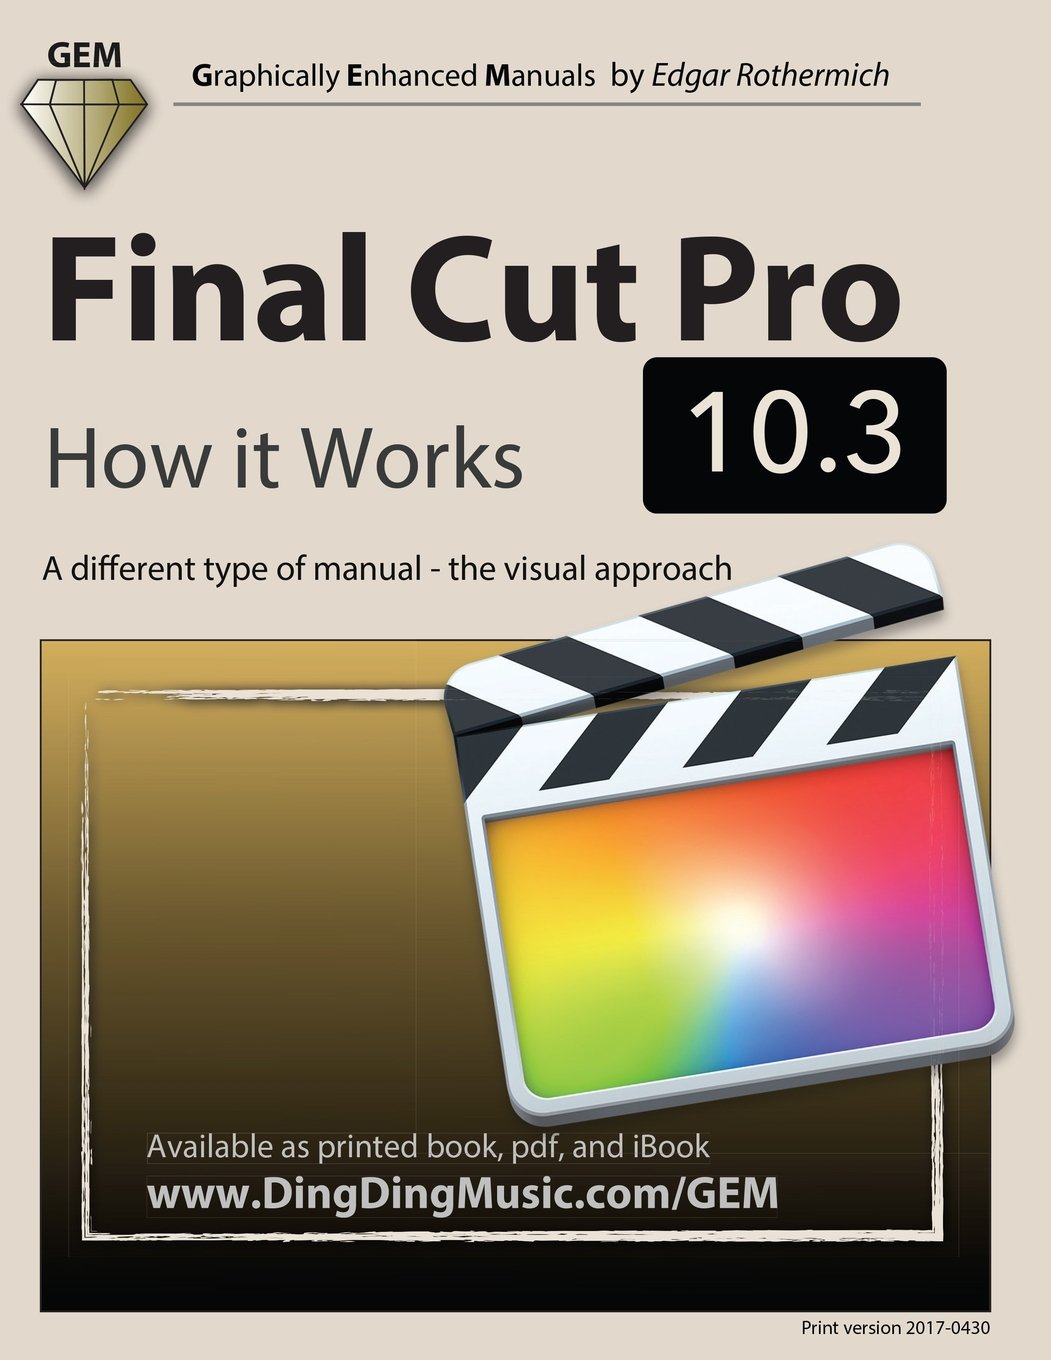 Final Cut Pro 10.3 - How it Works: A different type of manual - the visual approach (Graphically Enhanced Manuals)